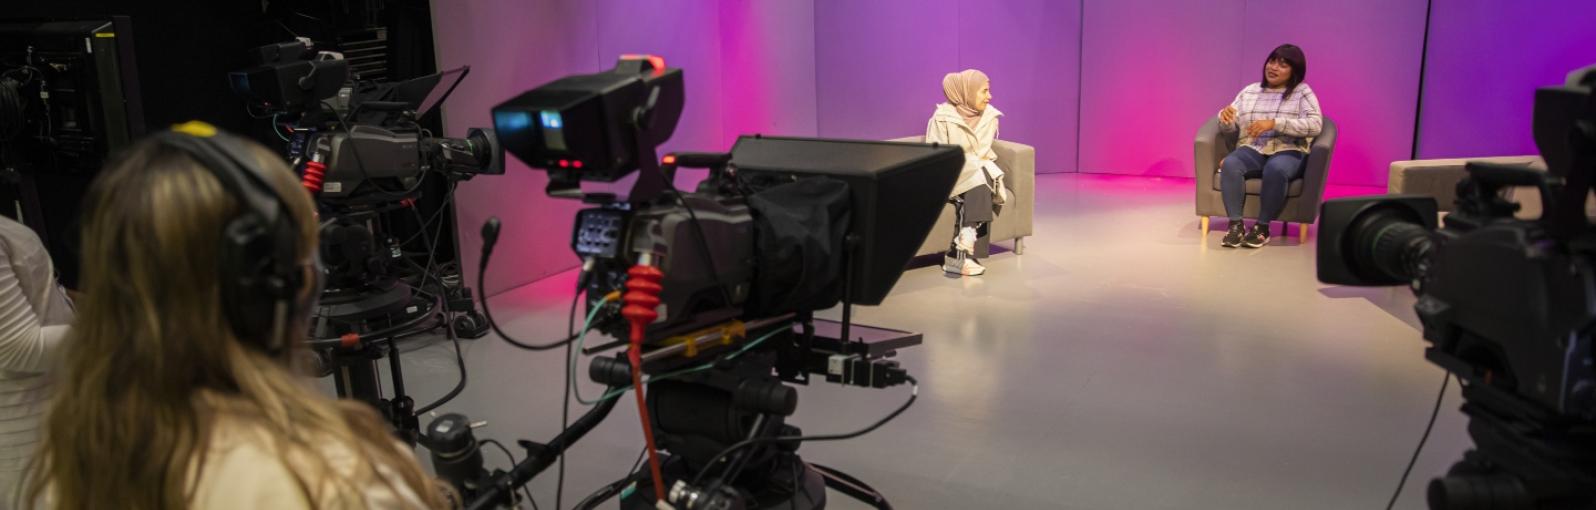 Two students presenting a talk show whilst another student films them in our TV studios